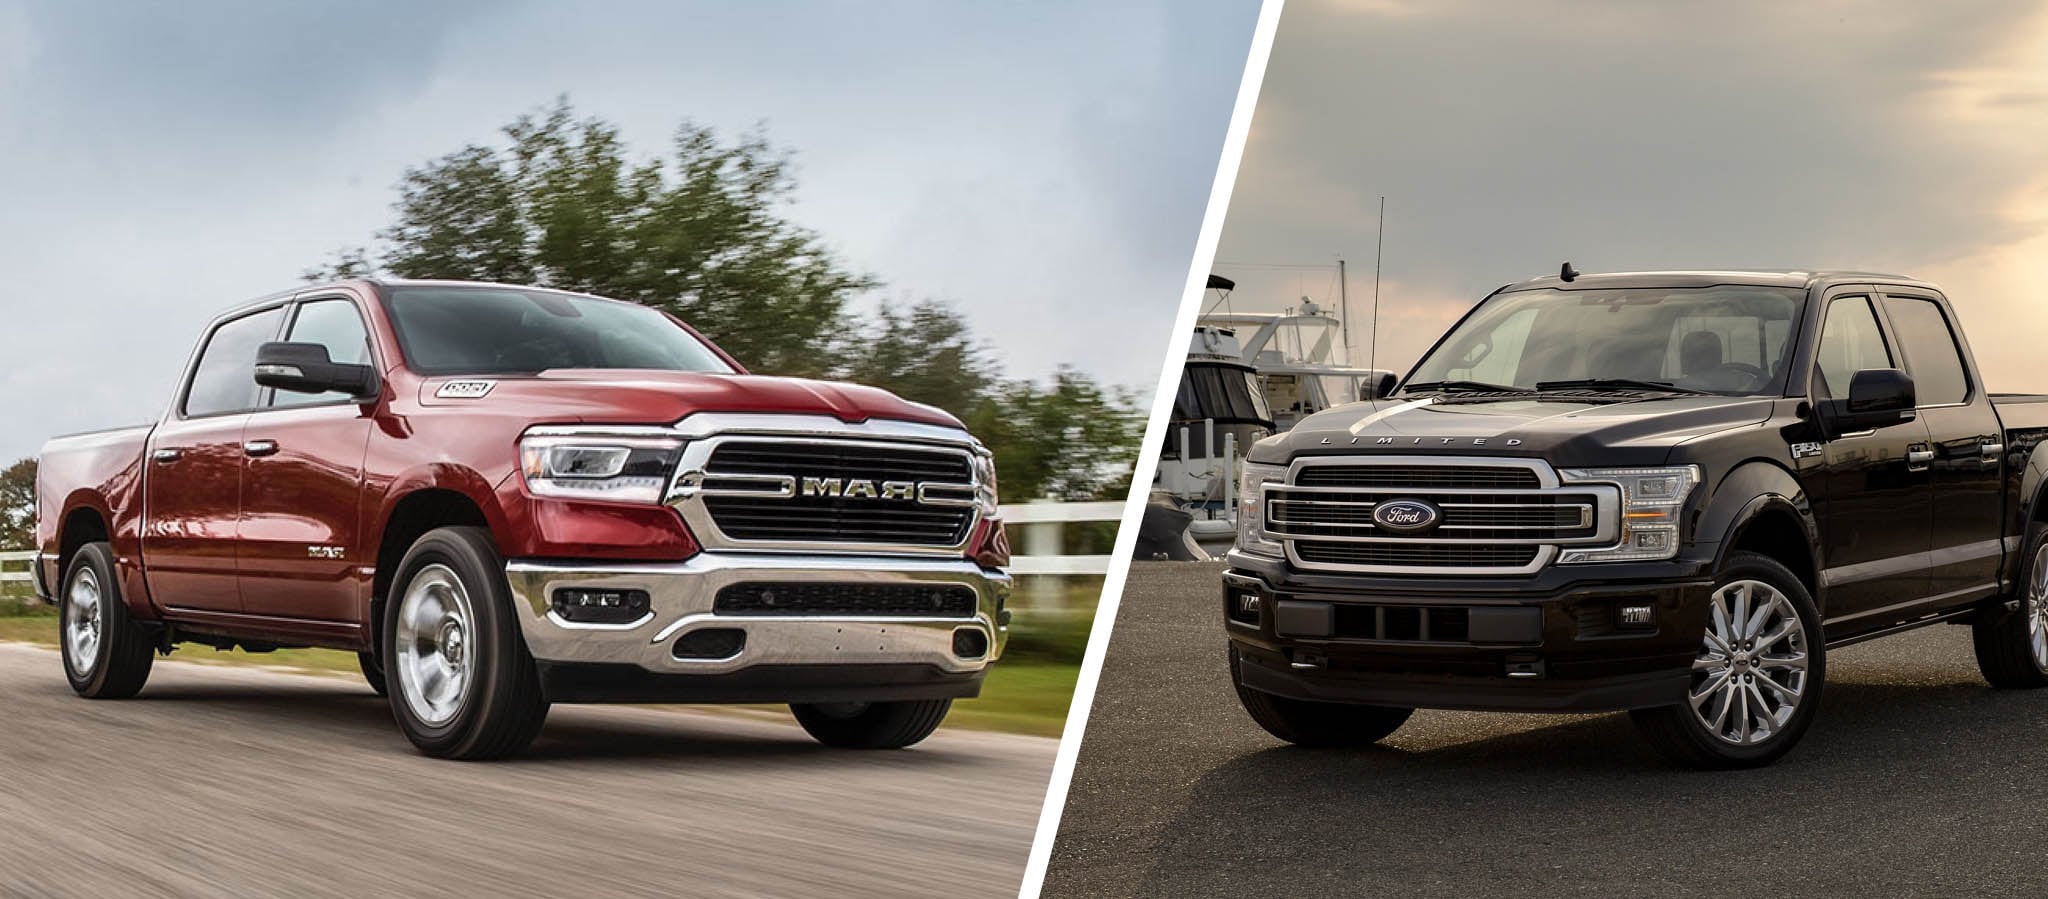 2020 RAM 1500 vs Ford F 150 Comparison Review, Specs, Photos & Prices